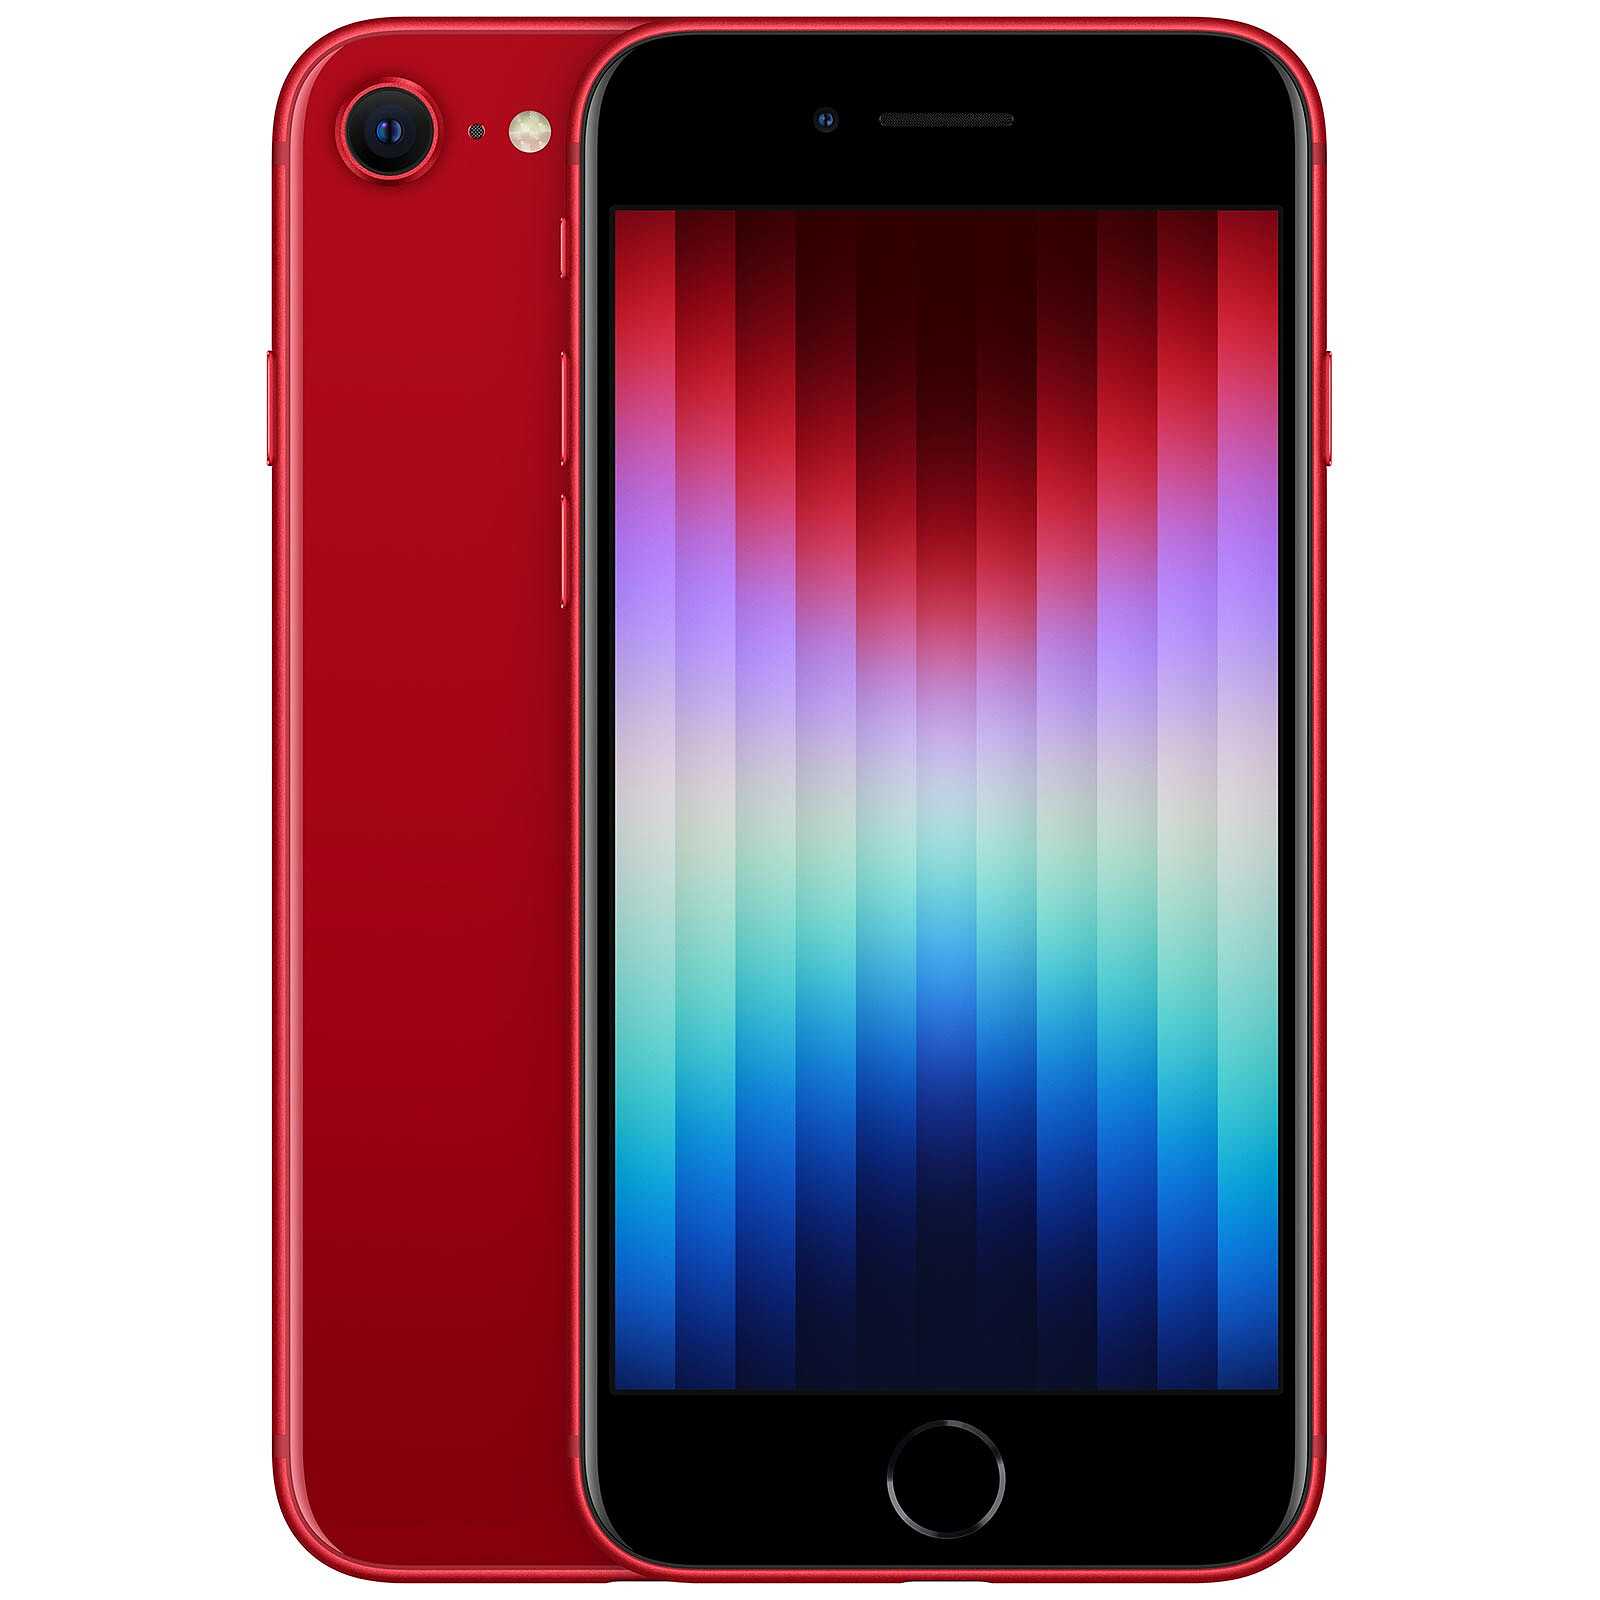 Apple iPhone SE 128GB (PRODUCT)RED (2022) Mobile phone  smartphone  LDLC 3-year warranty